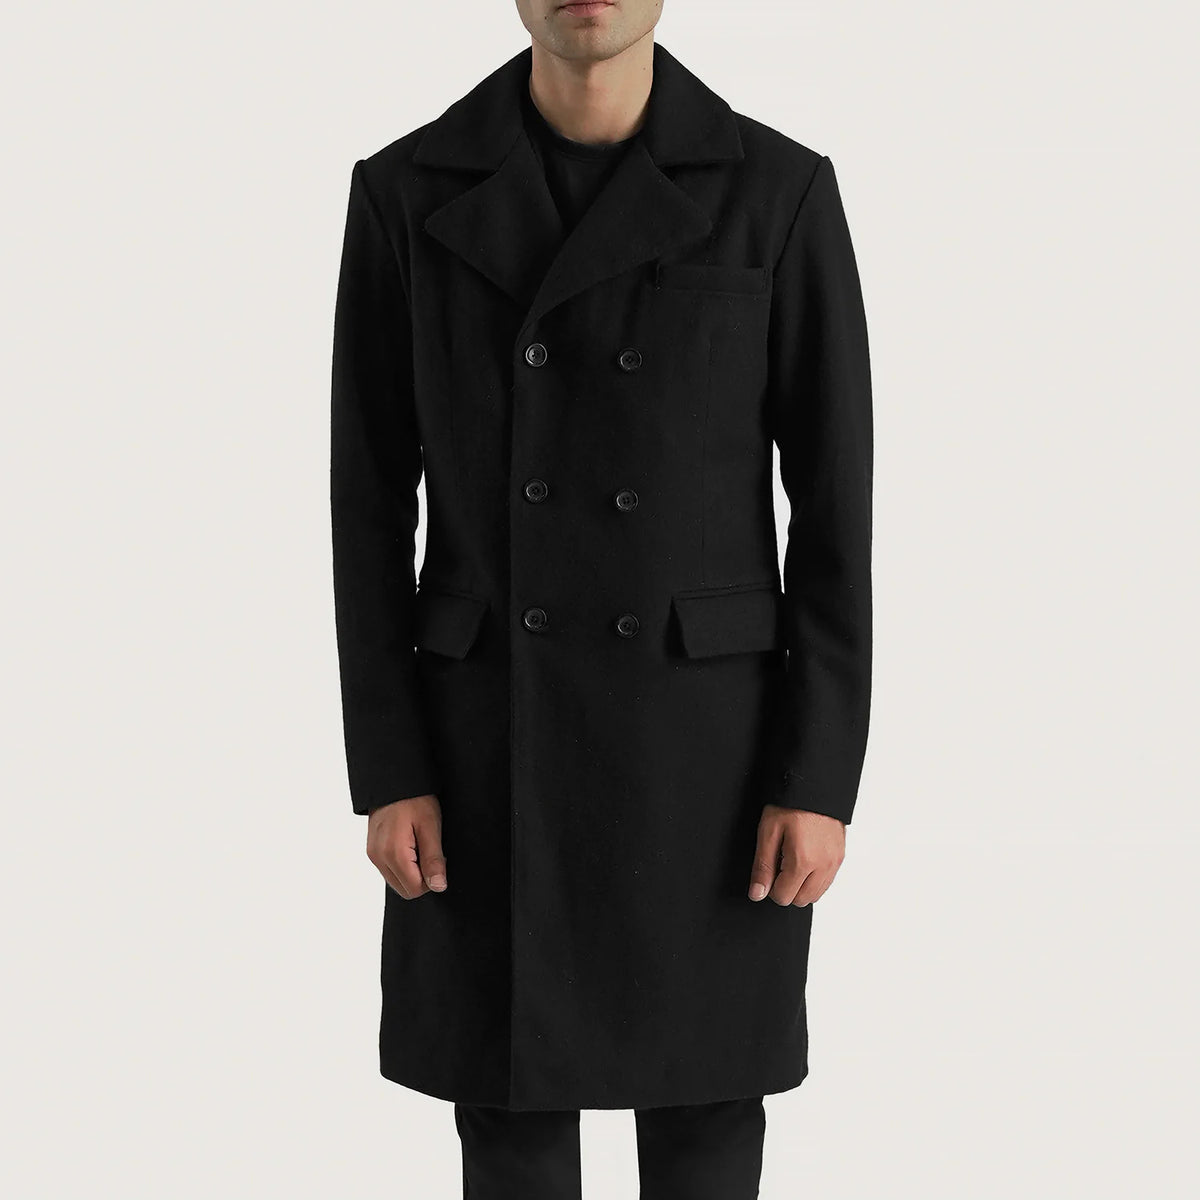 Claud Black Wool Double Breasted Coat